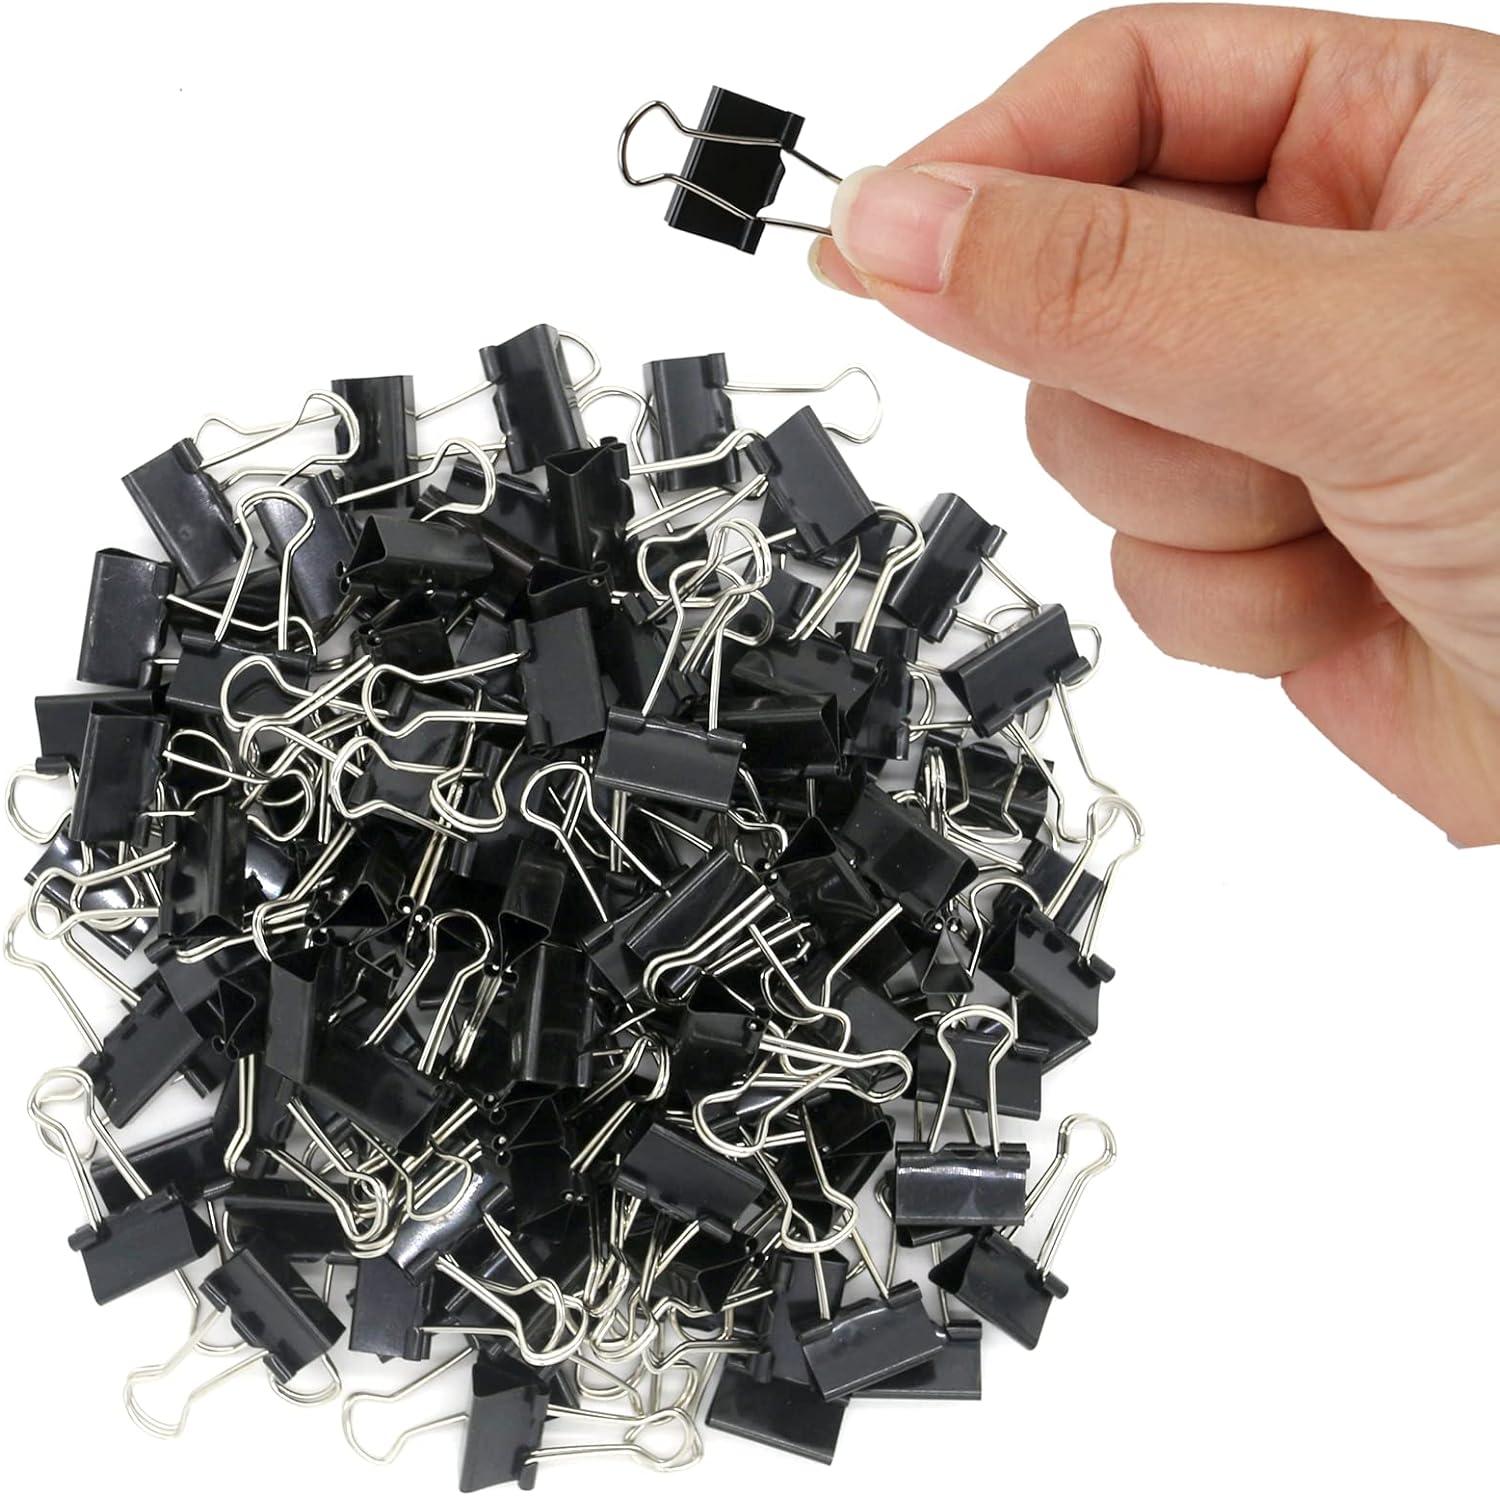 owlkela 120 pack mini binder clips black binder clips small paper clips 15mm 5/8 inch micro size office clips